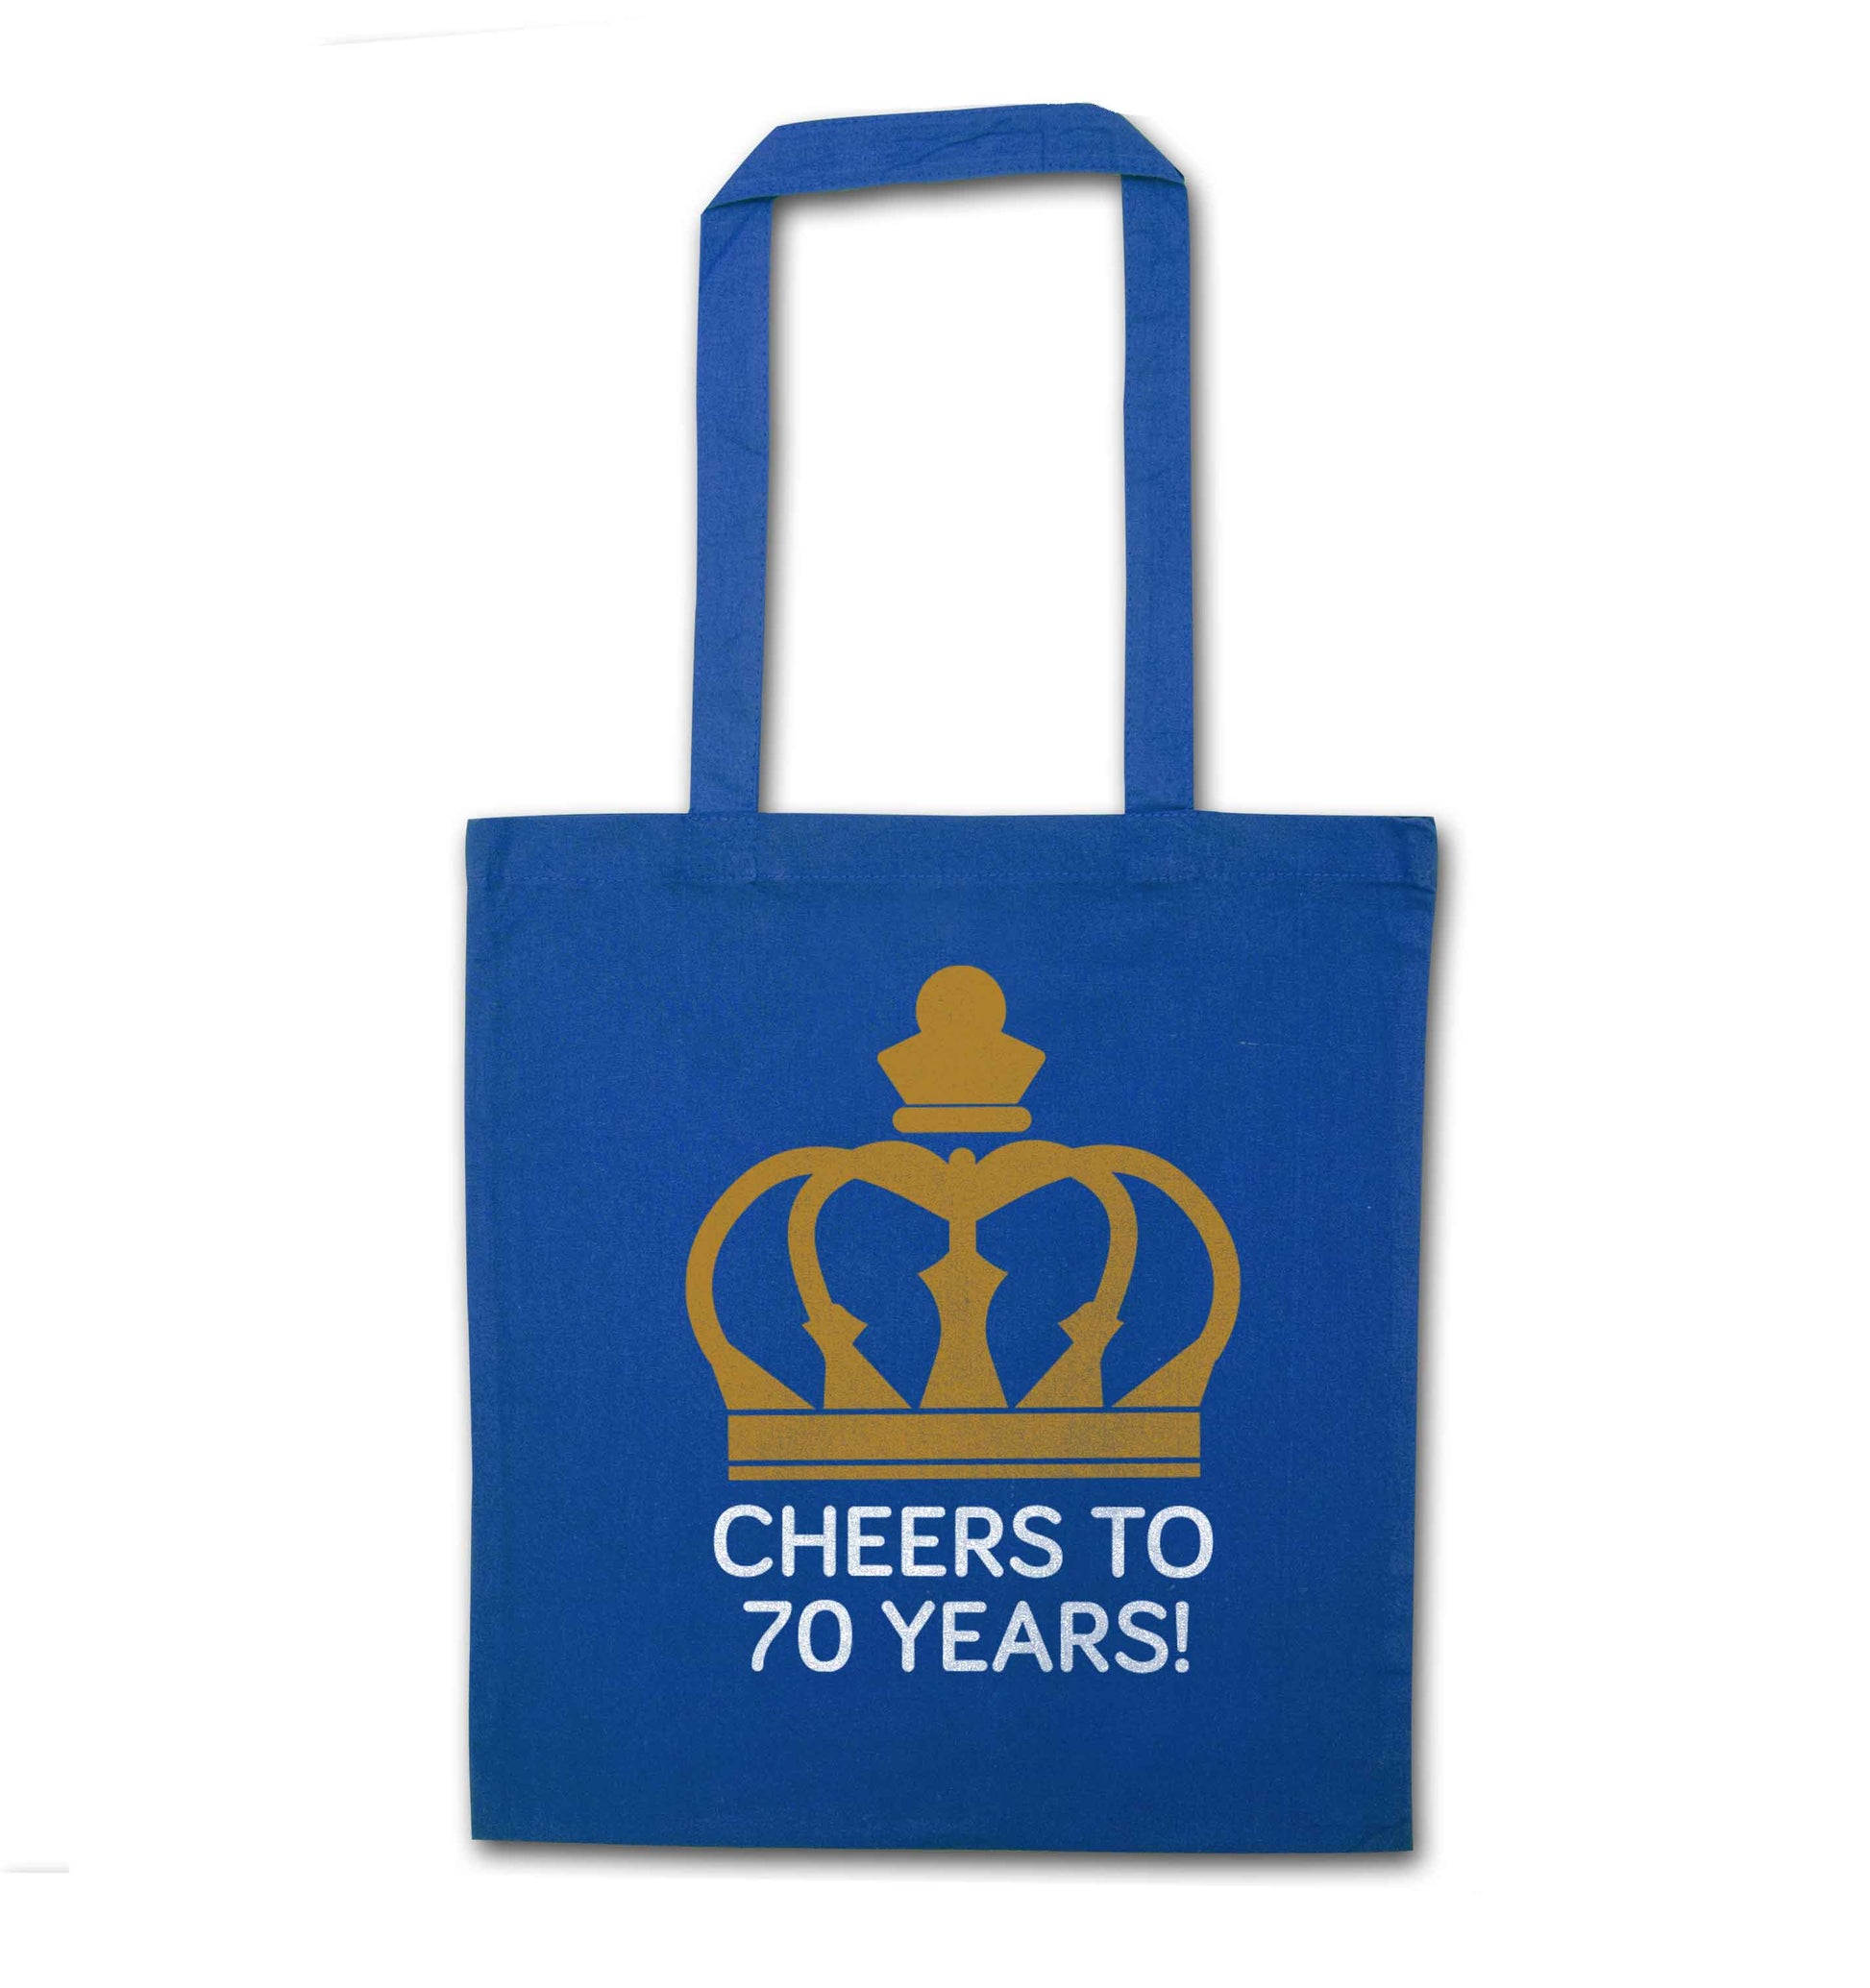 Cheers to 70 years! blue tote bag